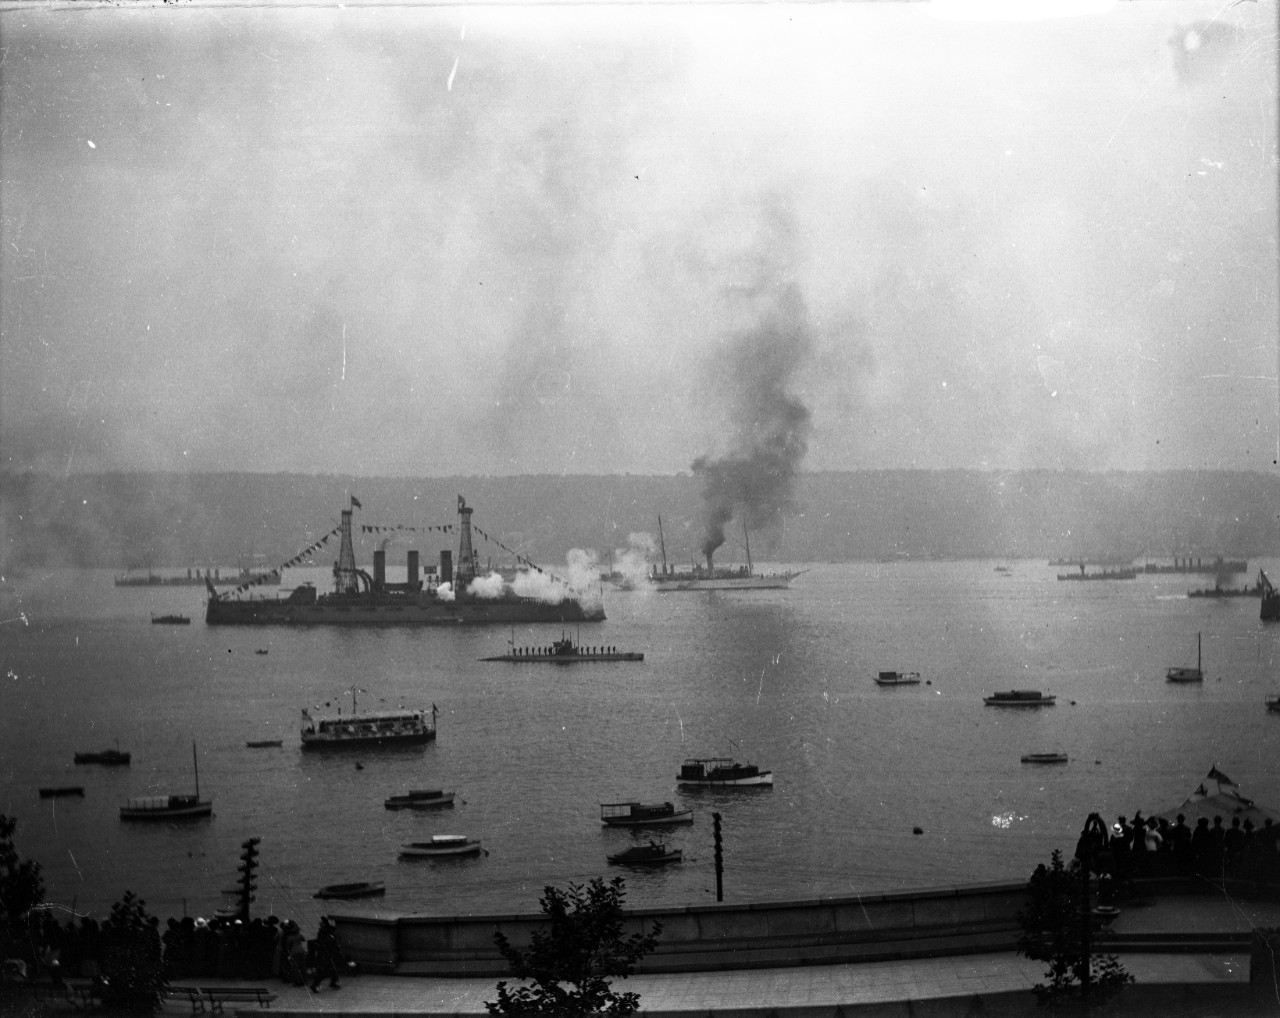 Collection 18 class plate negatives of the Naval Review, circa 1912, in associated with a Henry Hudson celebration. Specific ships seen in the images include: HMS Invincible; USS South Carolina, USS Michigan, USS Delaware & USS South Dakota; British cruisers, a Virginia class battleship; USS Kansas, USS Connecticut, USS Wyoming, & Henry Hudson’s Half Moon (replica). There is an image list for each glass negative that includes a description.